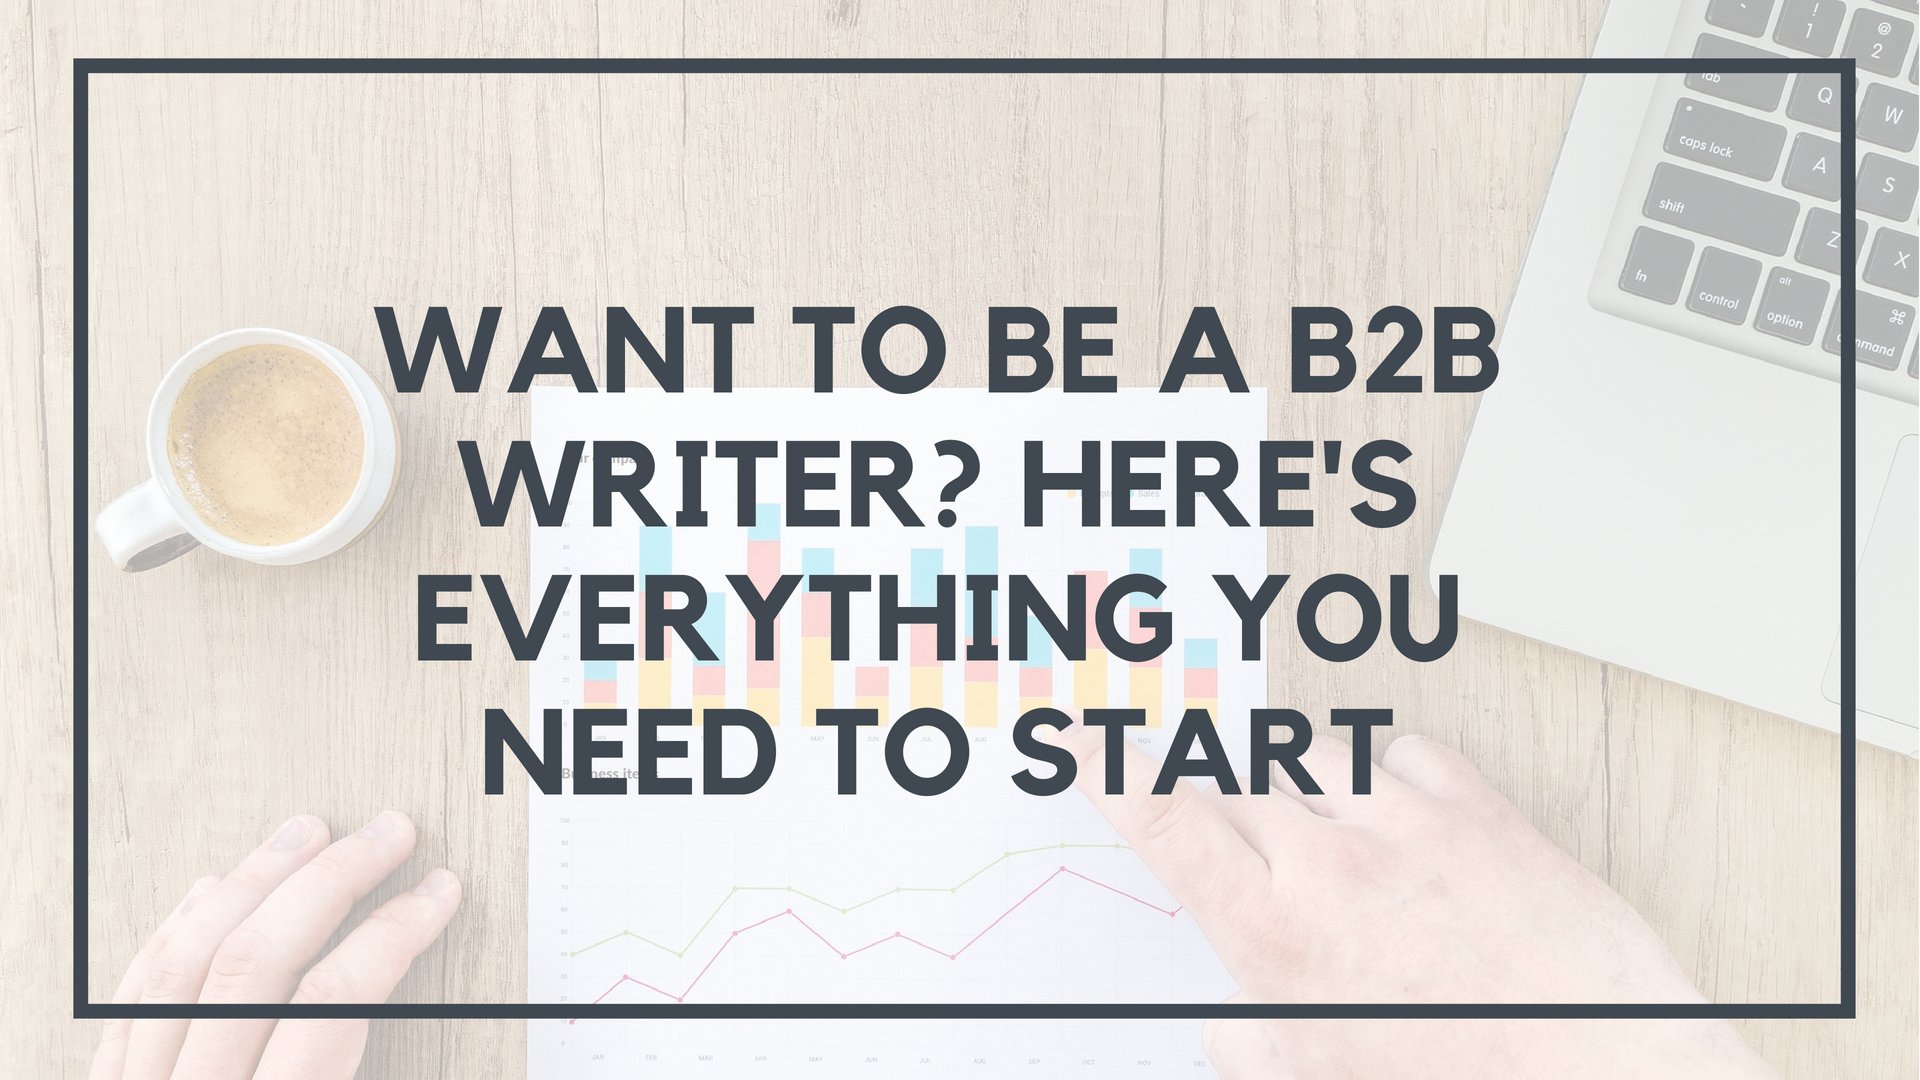 Want To Start B2B Writing? Here’s Everything You Need To Know